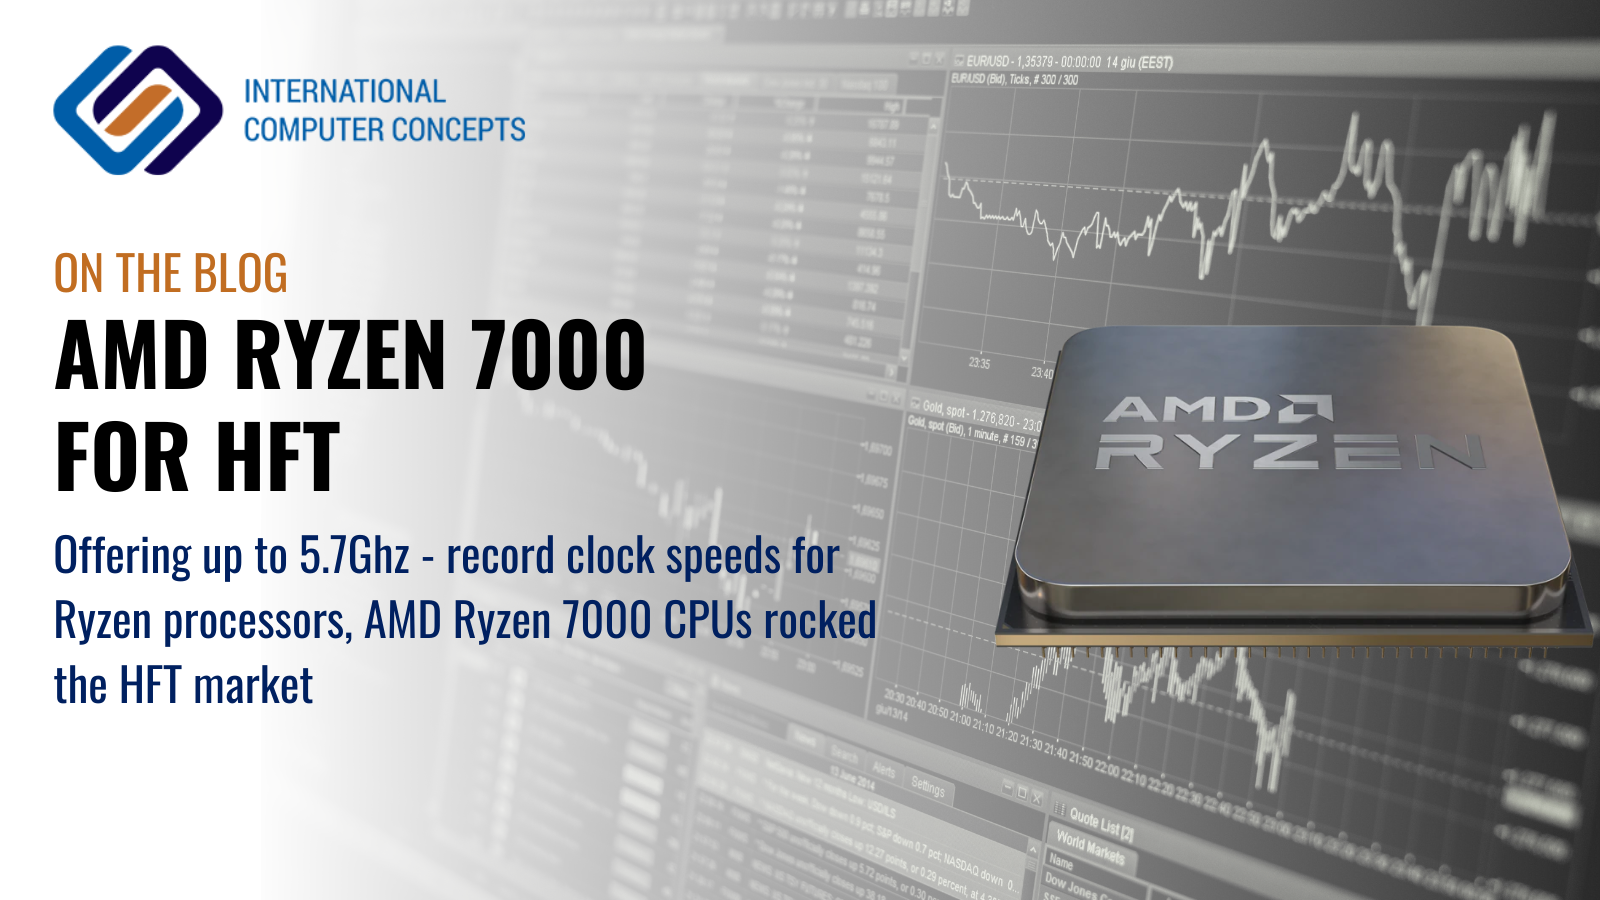 Next generation High Frequency Trading servers with AMD Ryzen 7000